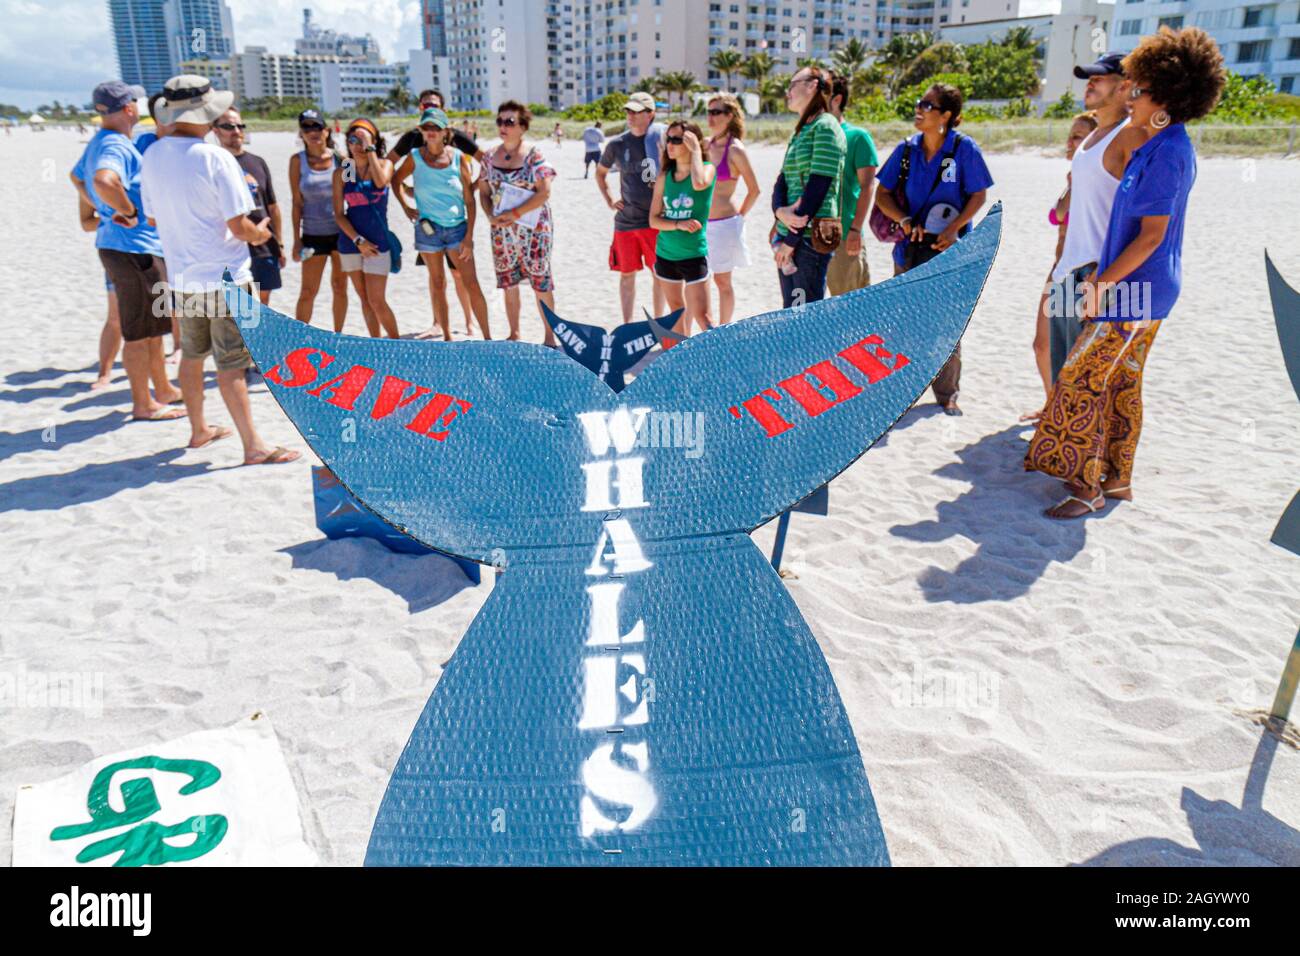 Miami Beach Florida,Greenpeace,manifestation,protestation,Save the Whales,organisateur,organisation,panneau,groupe,supporters,FL100526026 Banque D'Images